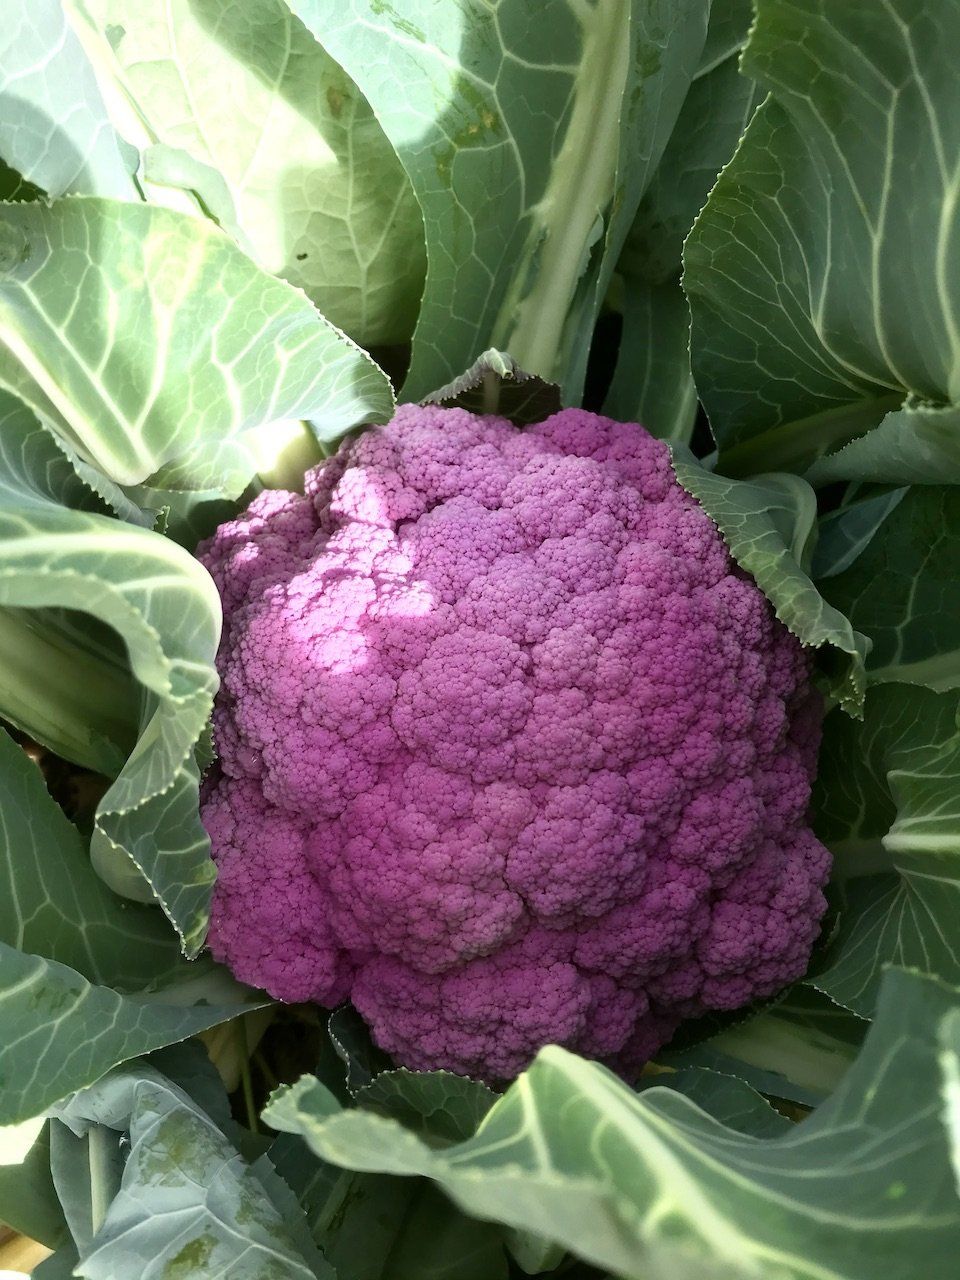 Next Happening: Purple Cauliflower, Delicata, and Mustard Greens Available this Week